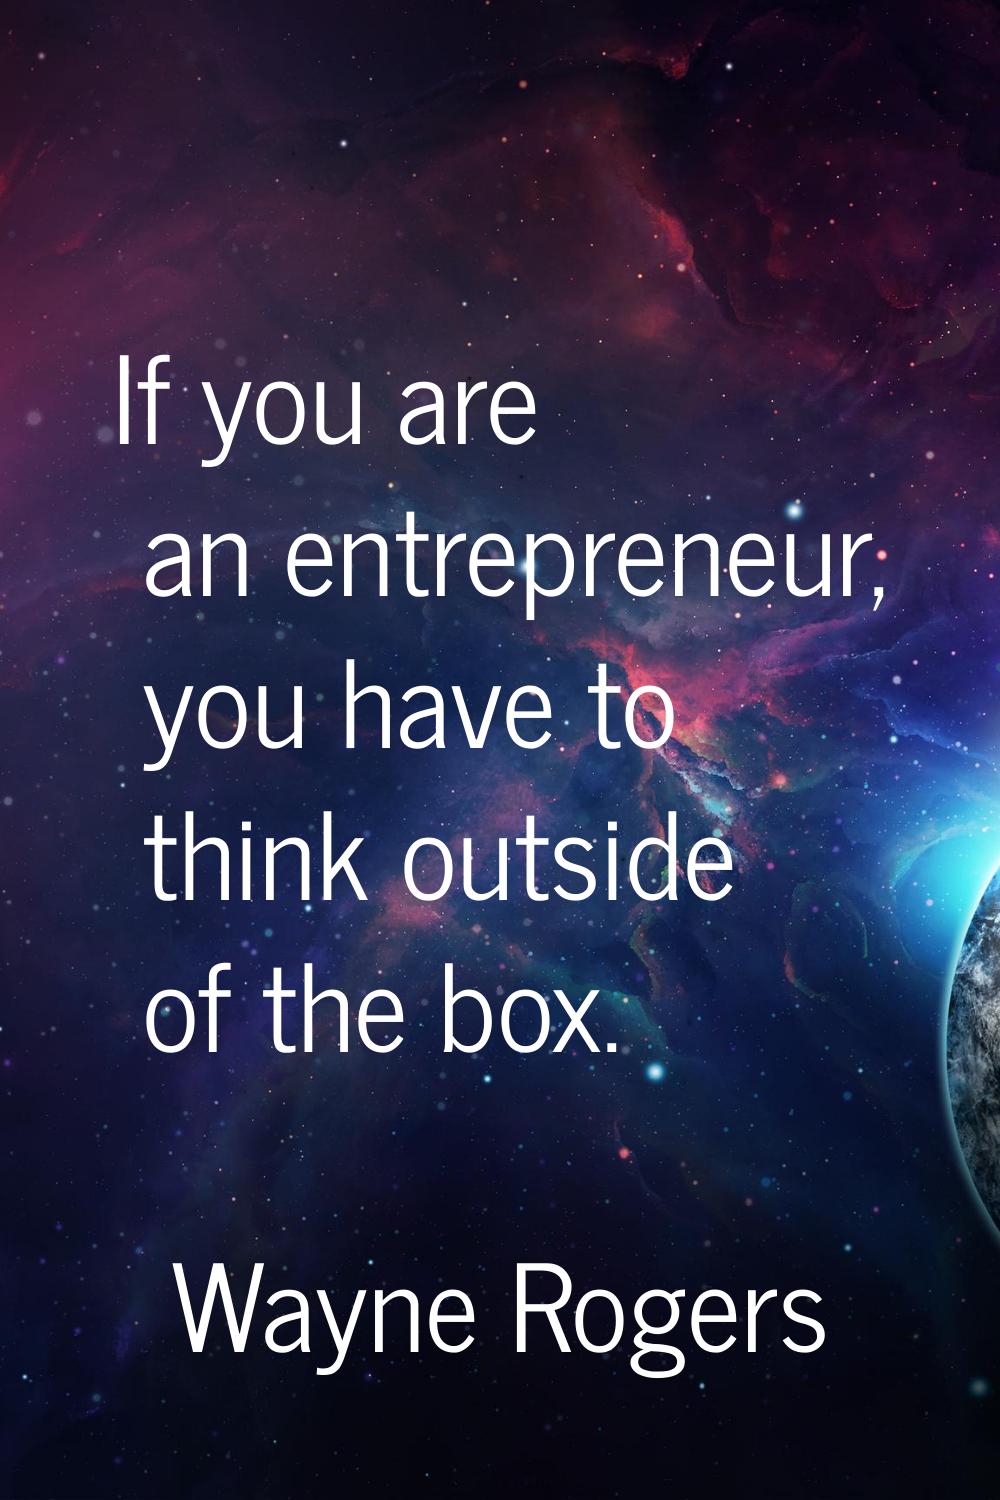 If you are an entrepreneur, you have to think outside of the box.